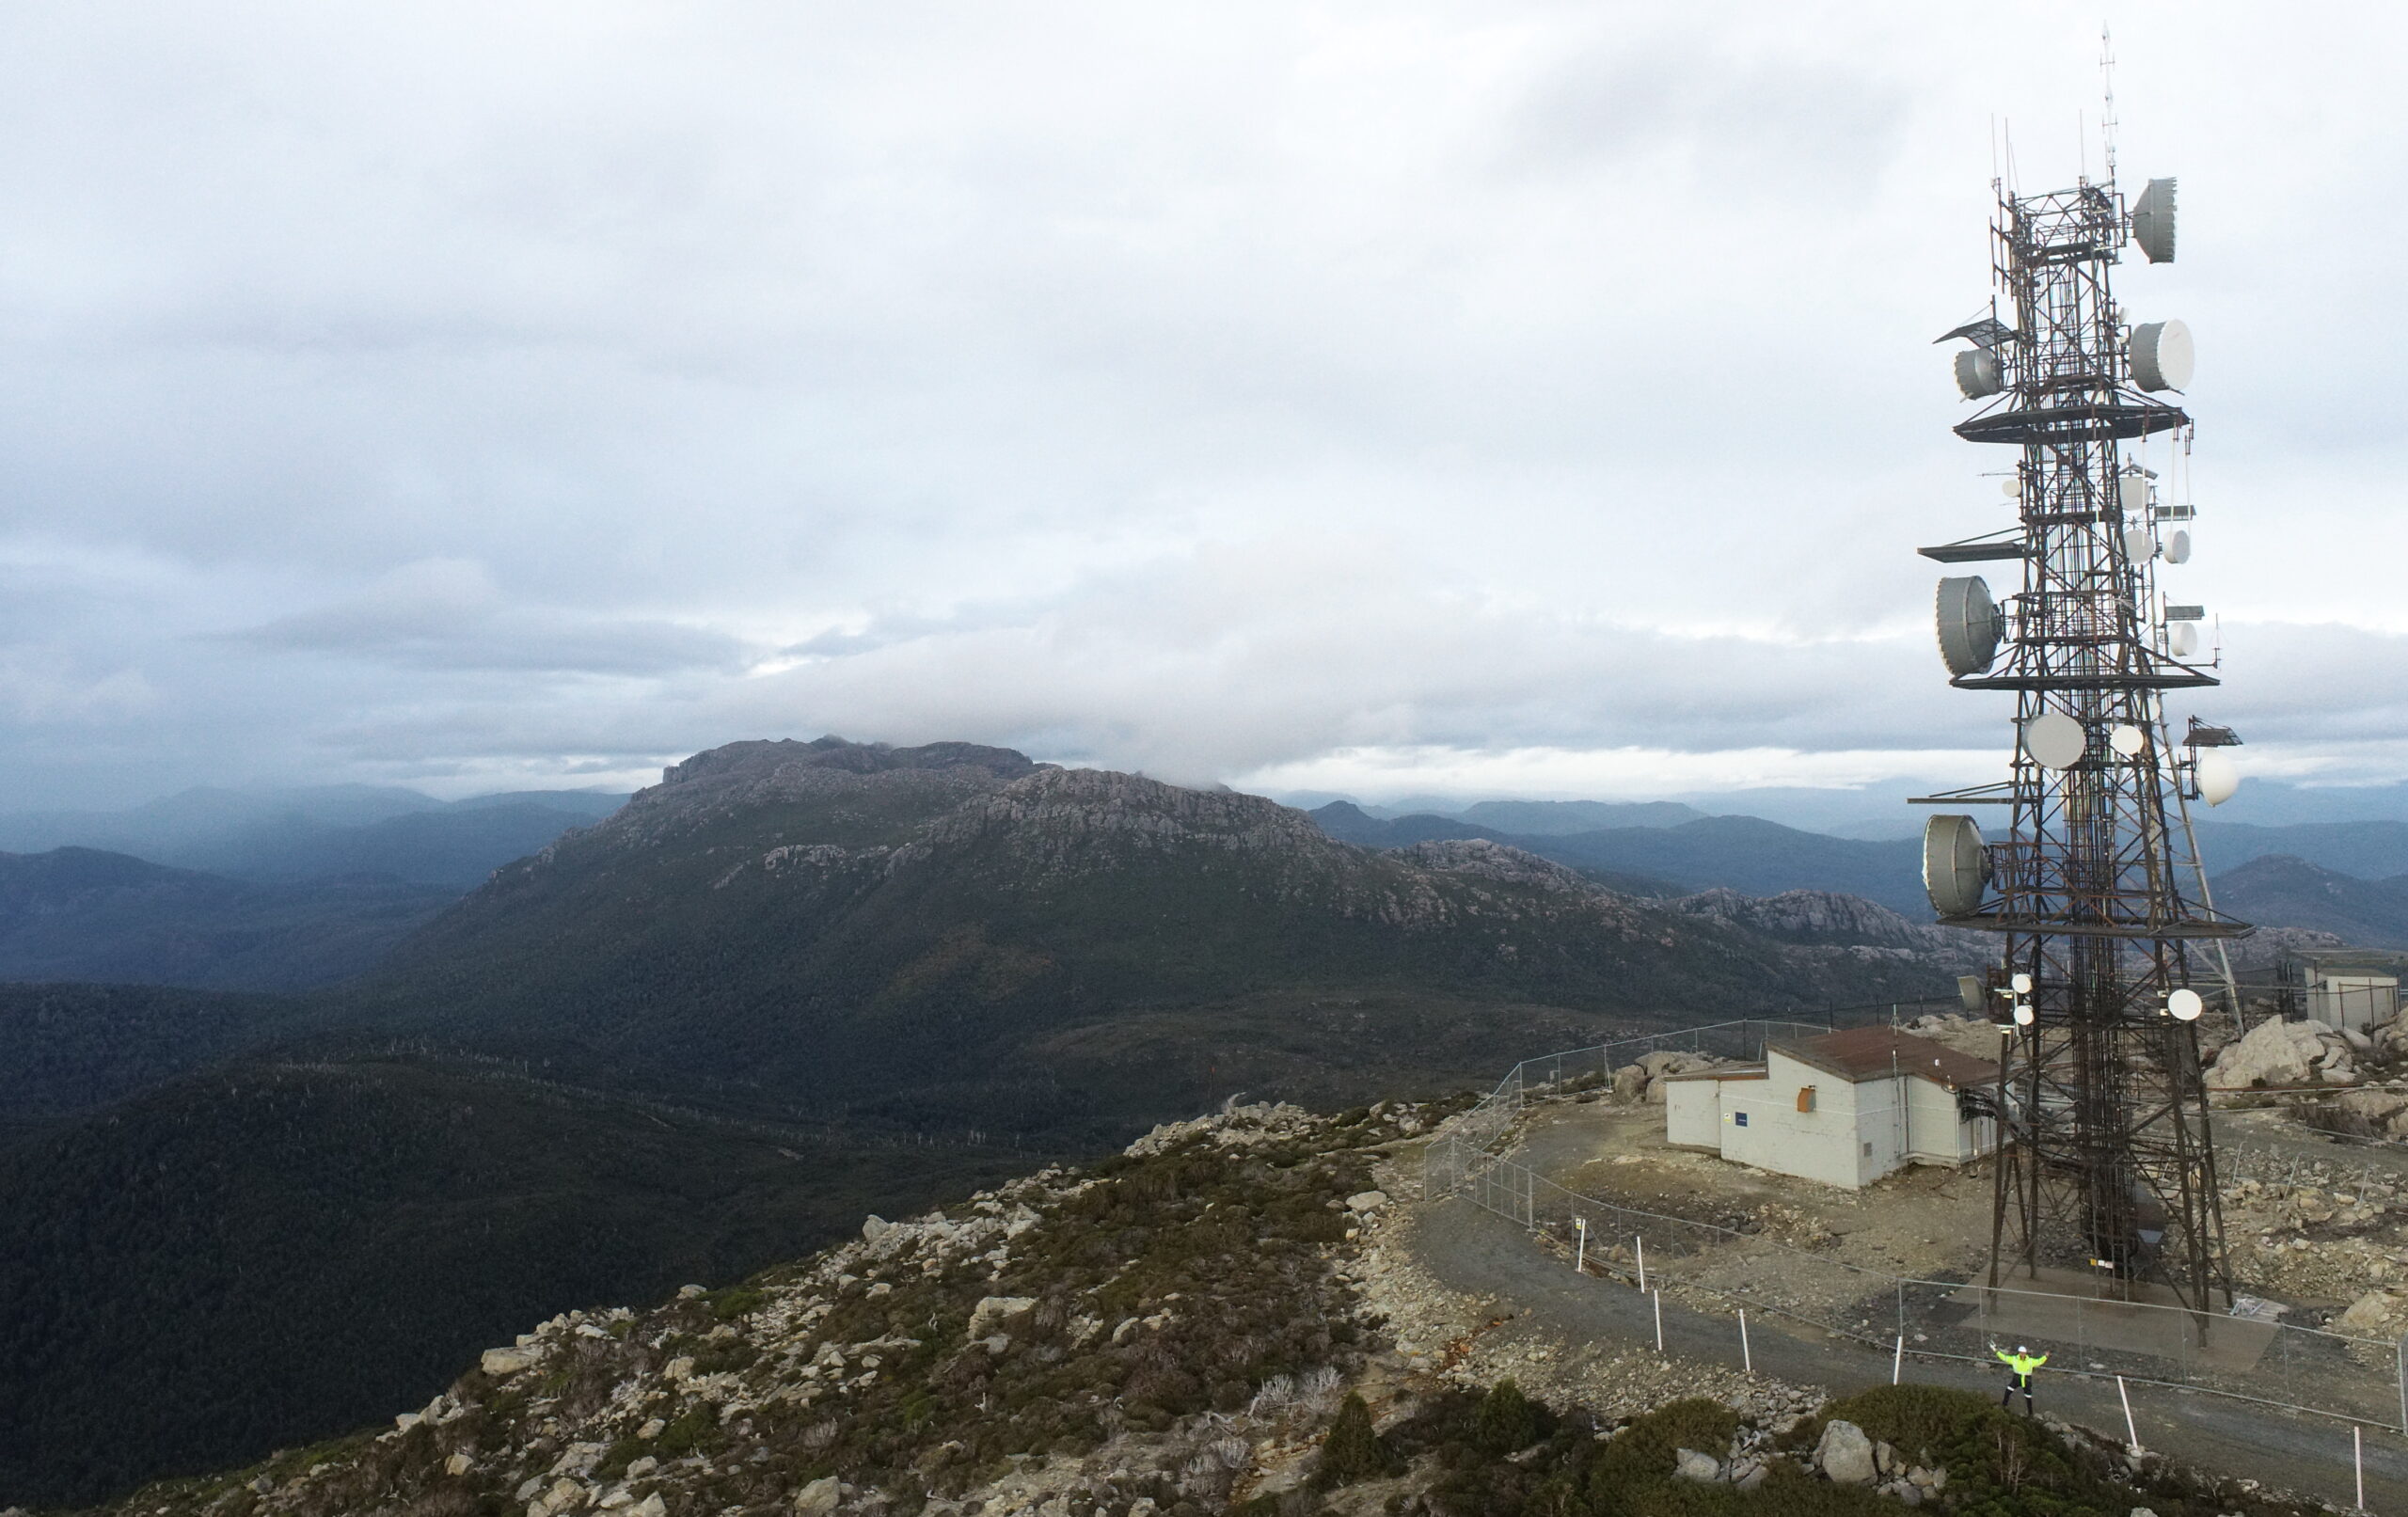 Wide shot of a telecommunication tower overlooking mountains and sky.